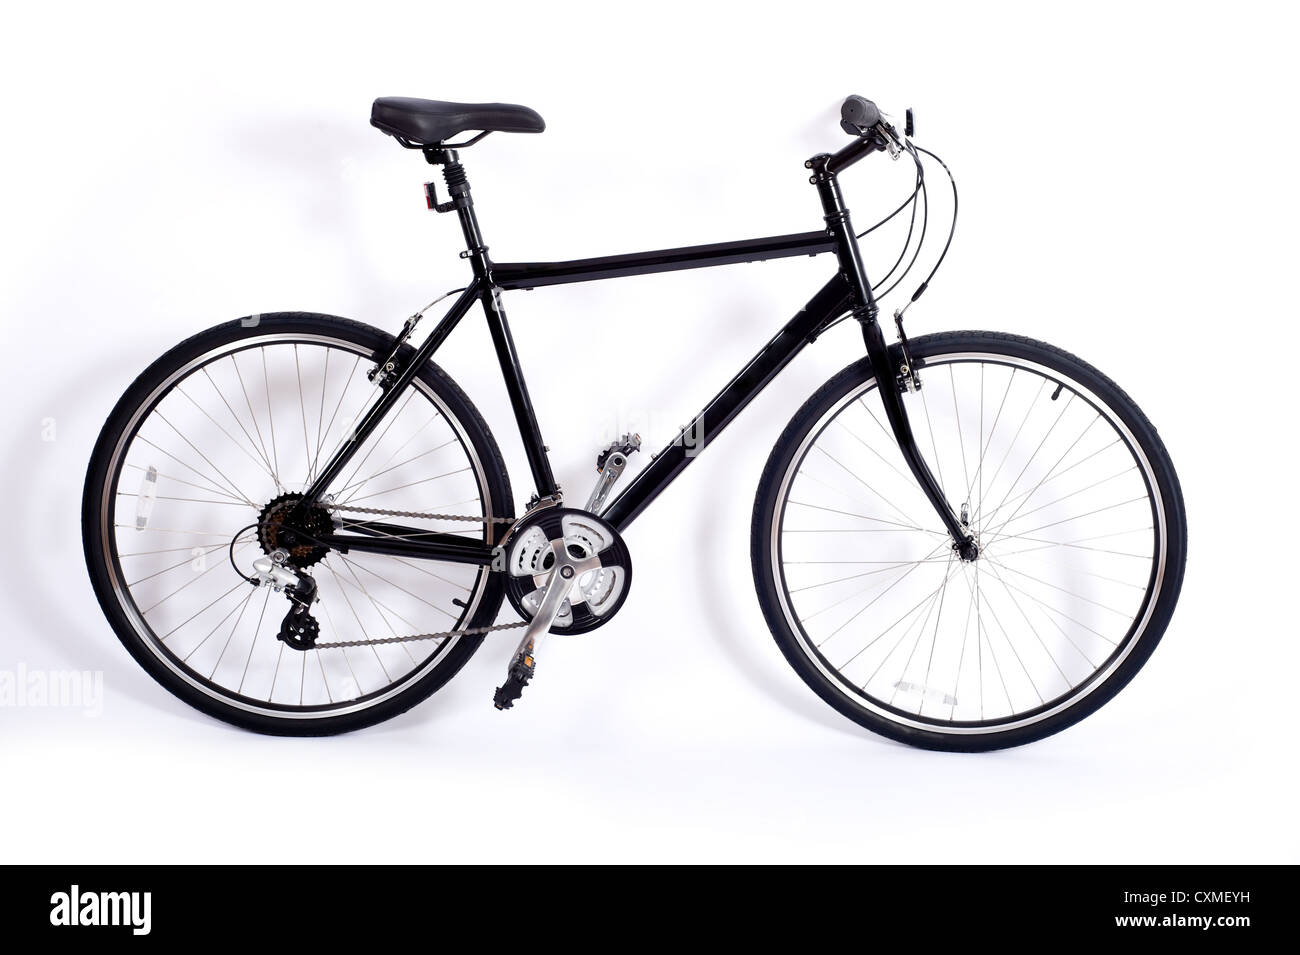 a black men's bicycle on a white background Stock Photo